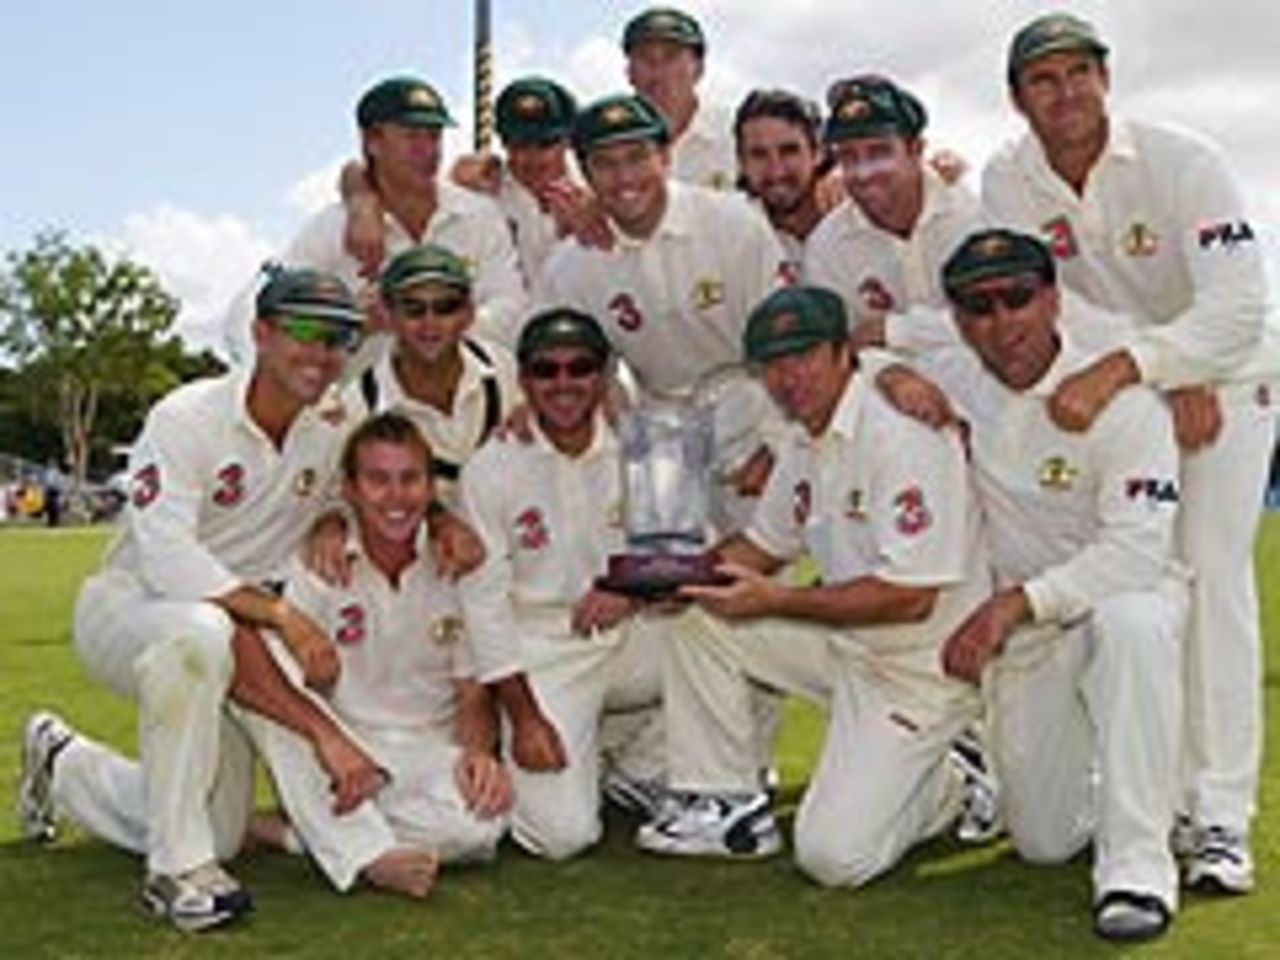 The Australian team celebrate after completing their 2-0 series win over Bangladesh with an innings victory at Cairns, July 28, 2003